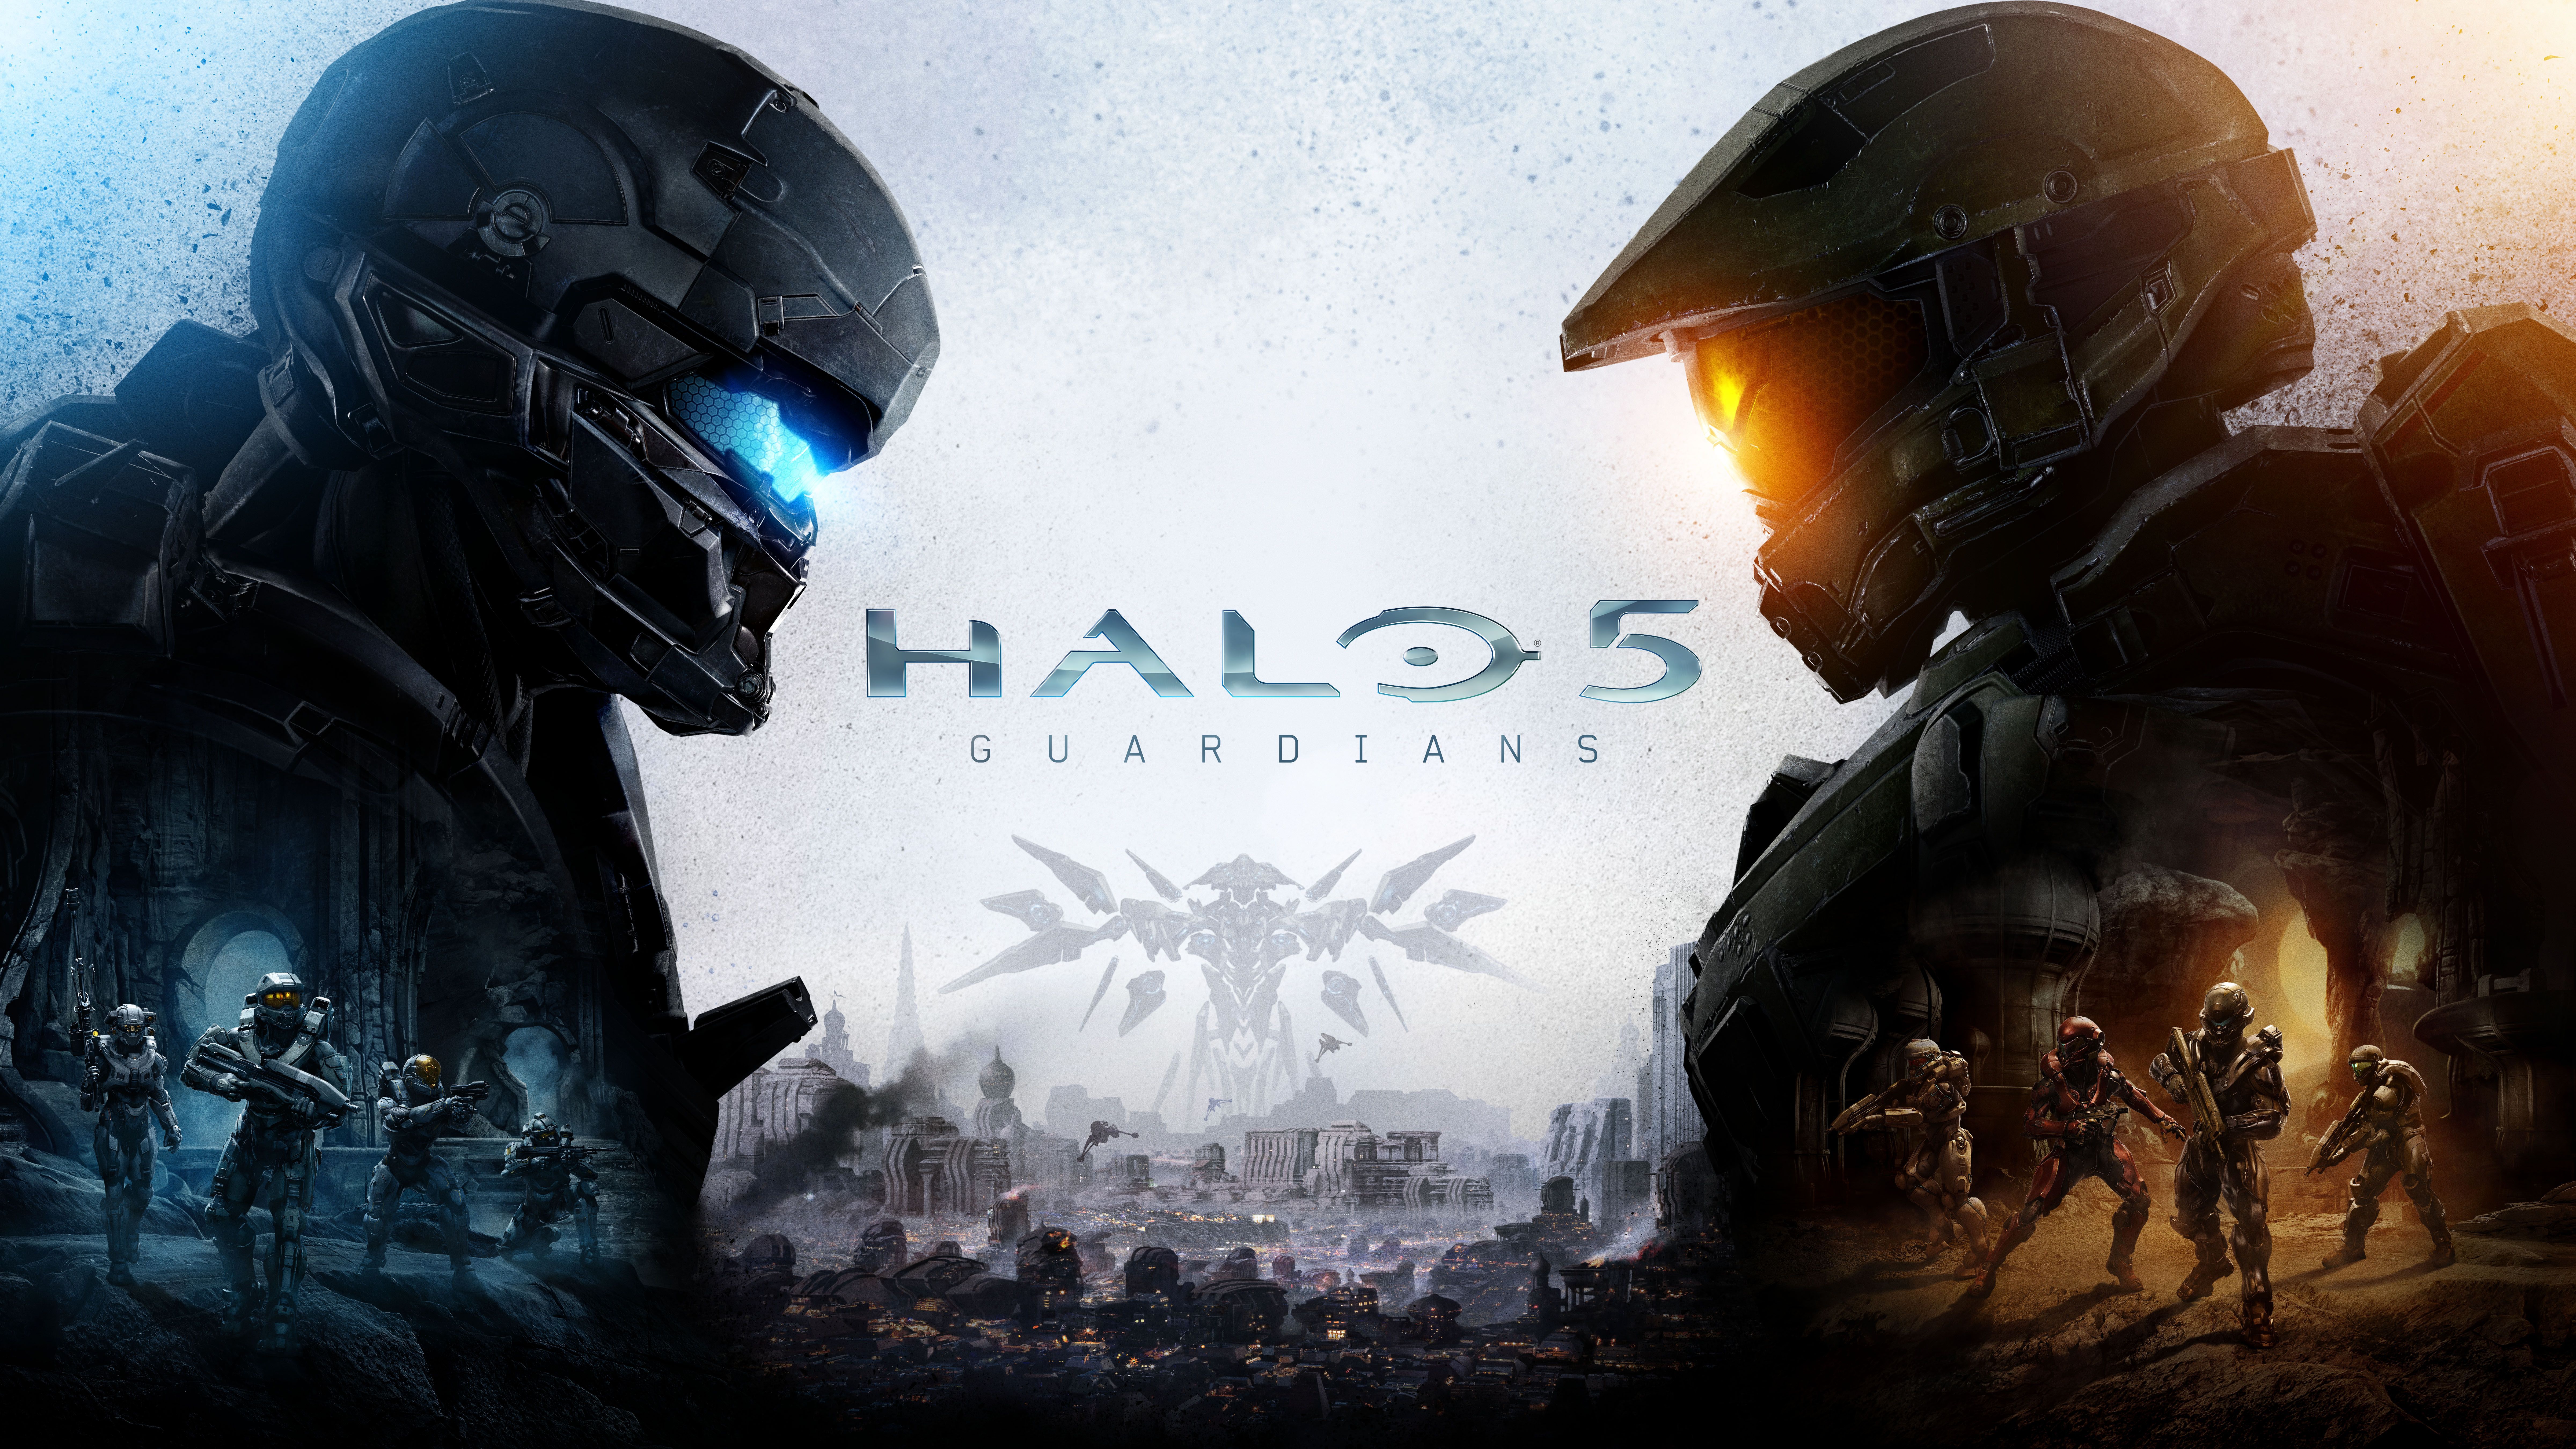 92 Halo 5 Guardians HD Wallpapers Backgrounds - Wallpaper Abyss